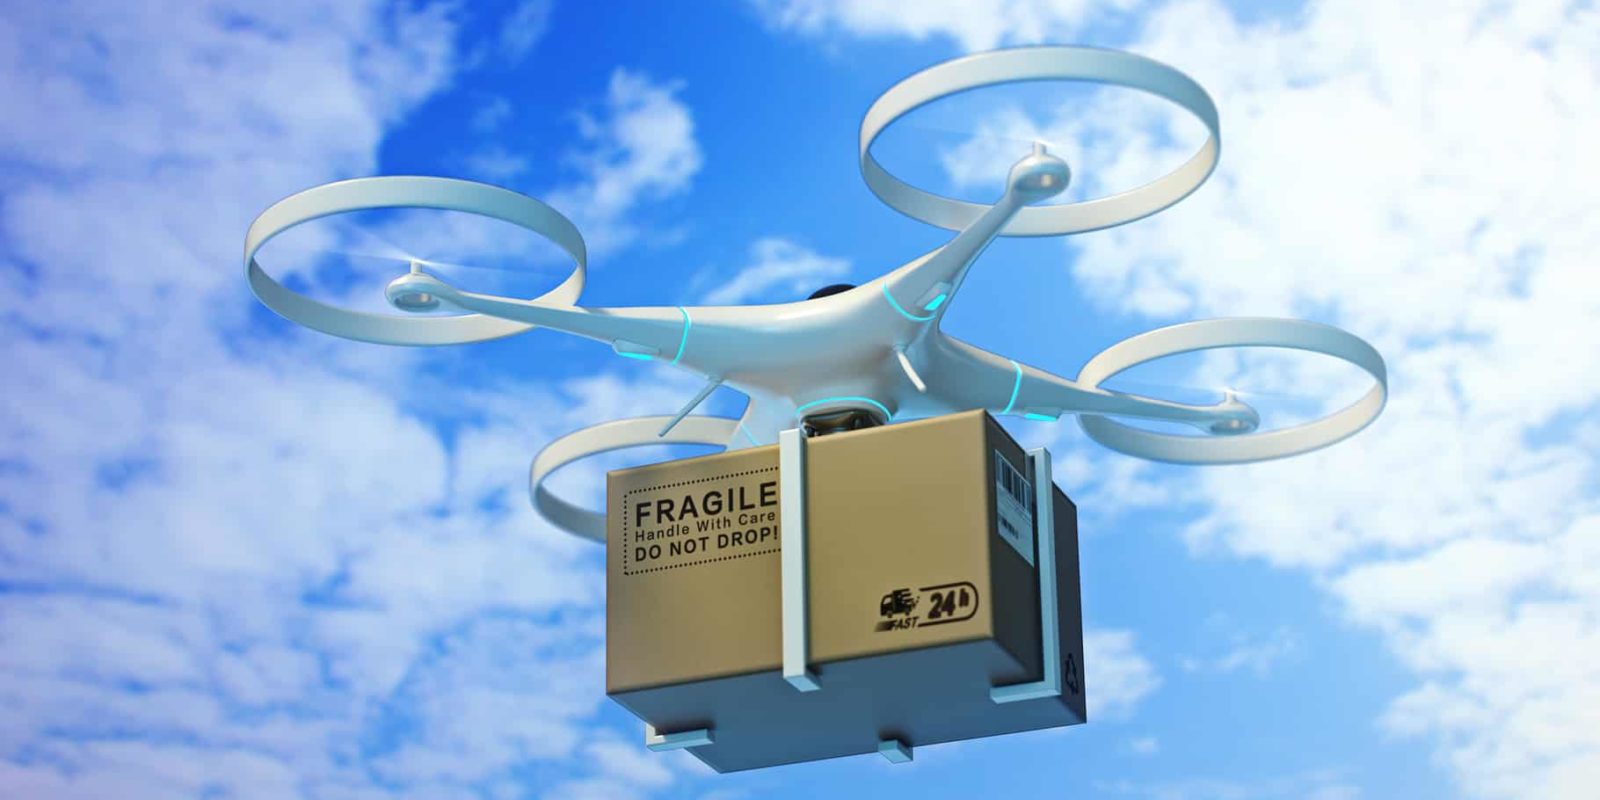 Retail drone delivery will be dictated by consumer attitudes